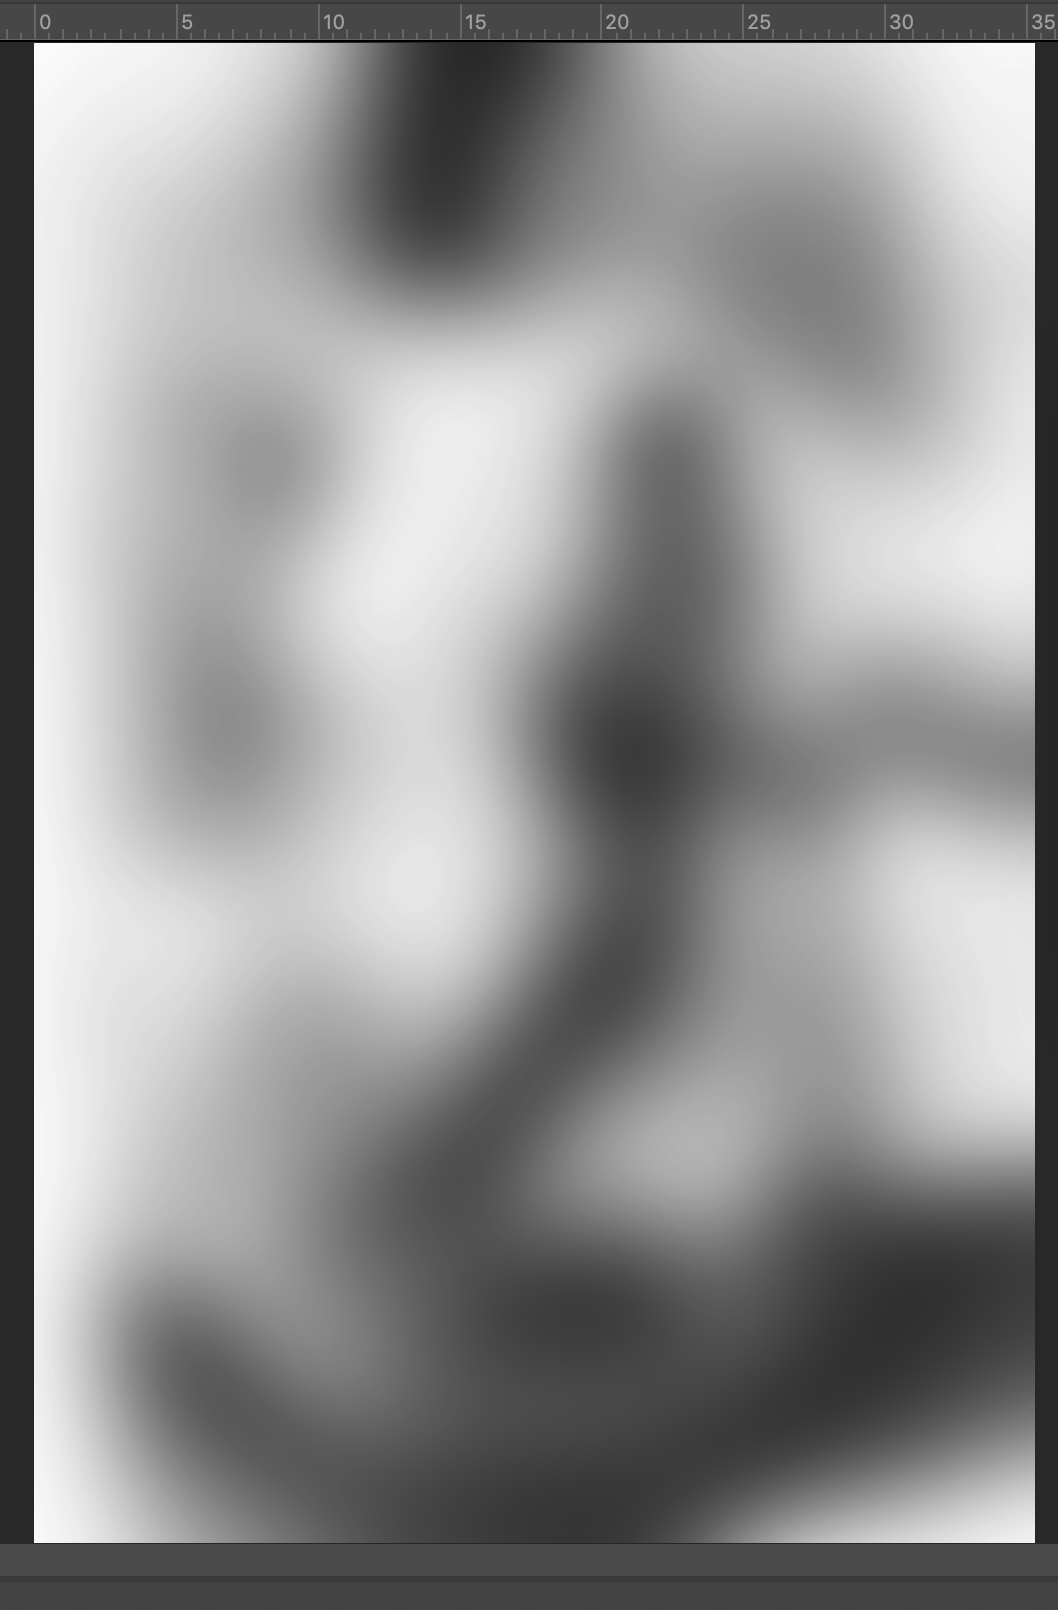 blurry black and white image in Photoshop